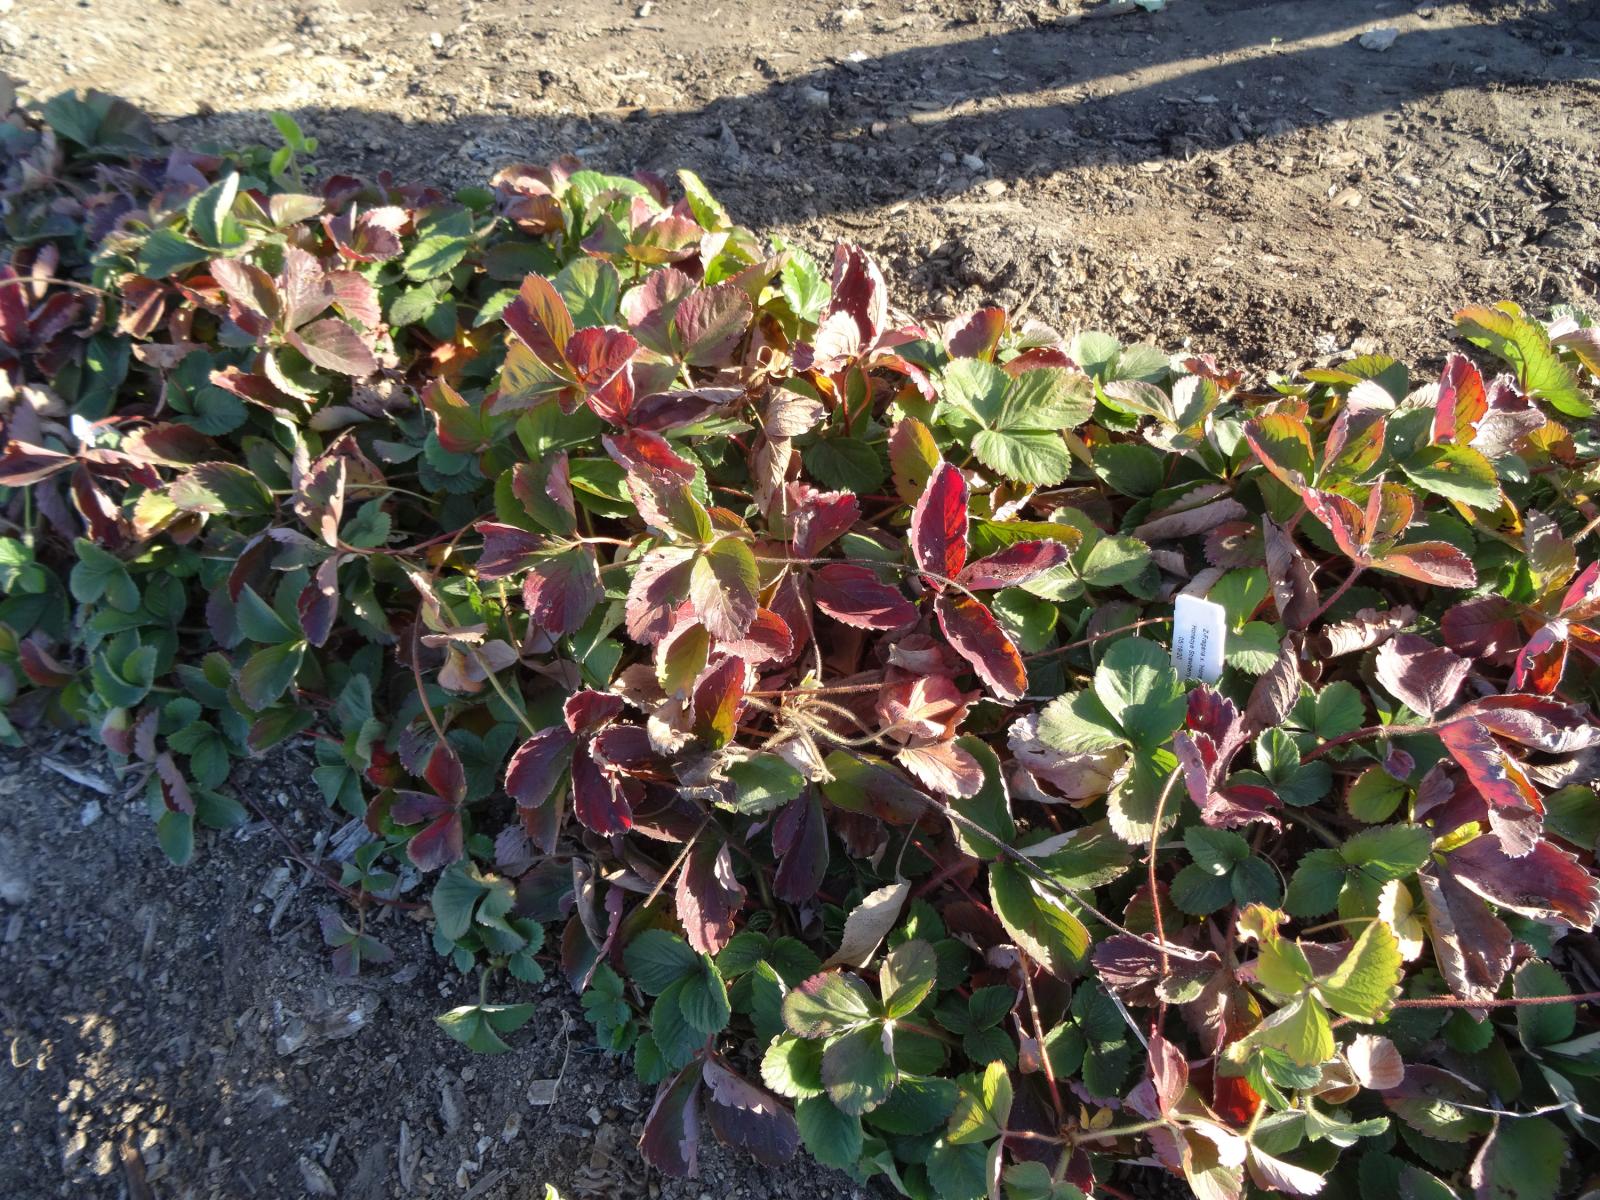 Figure 1. Strawberry plants showing Fall color (November 2020).